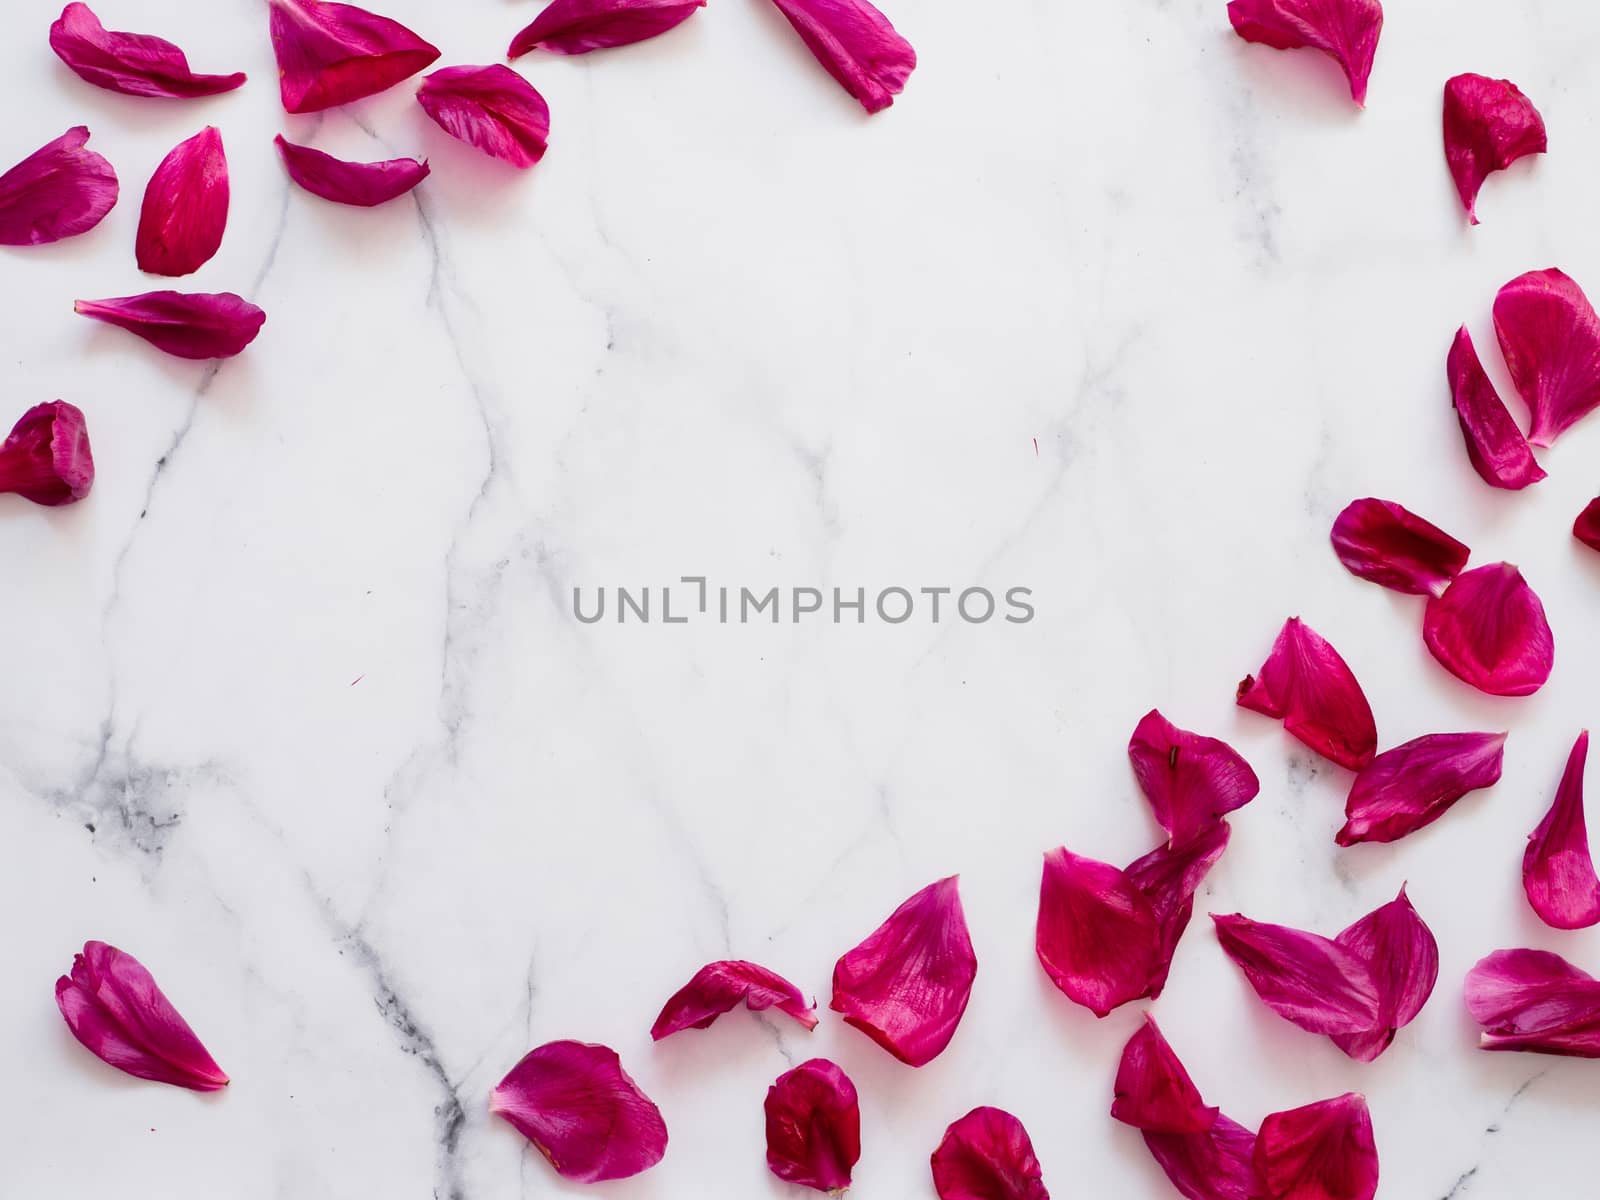 Red burgundy peony petals flat lay on white marble background. Flower petals with copy space for text or design in center. Creative layout made of flowers leaves. Flat lay pattern.